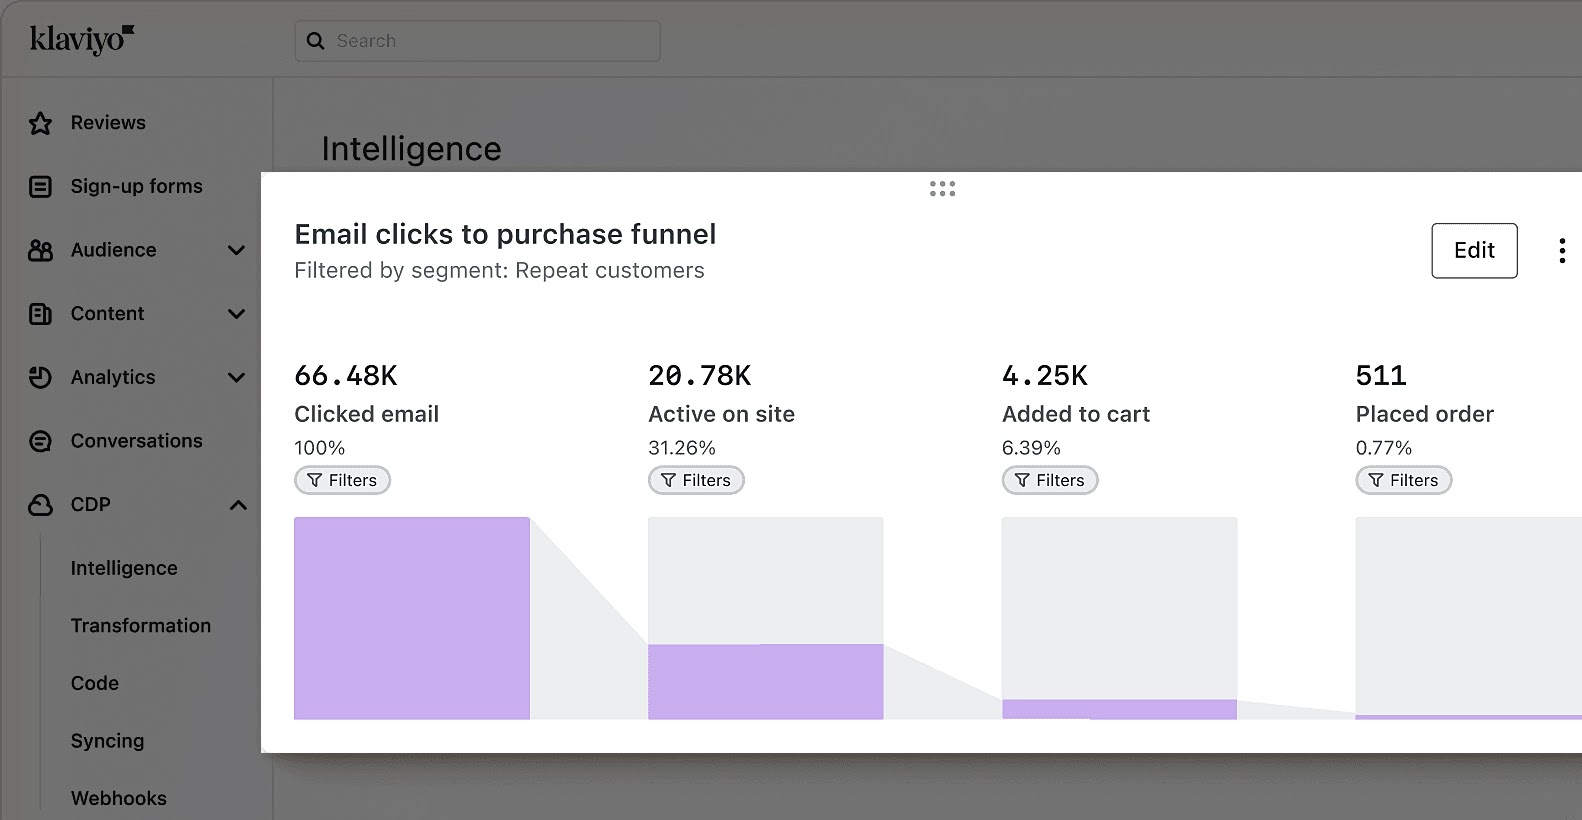 "Email clicks to purchase funnel" graphs in Klaviyo